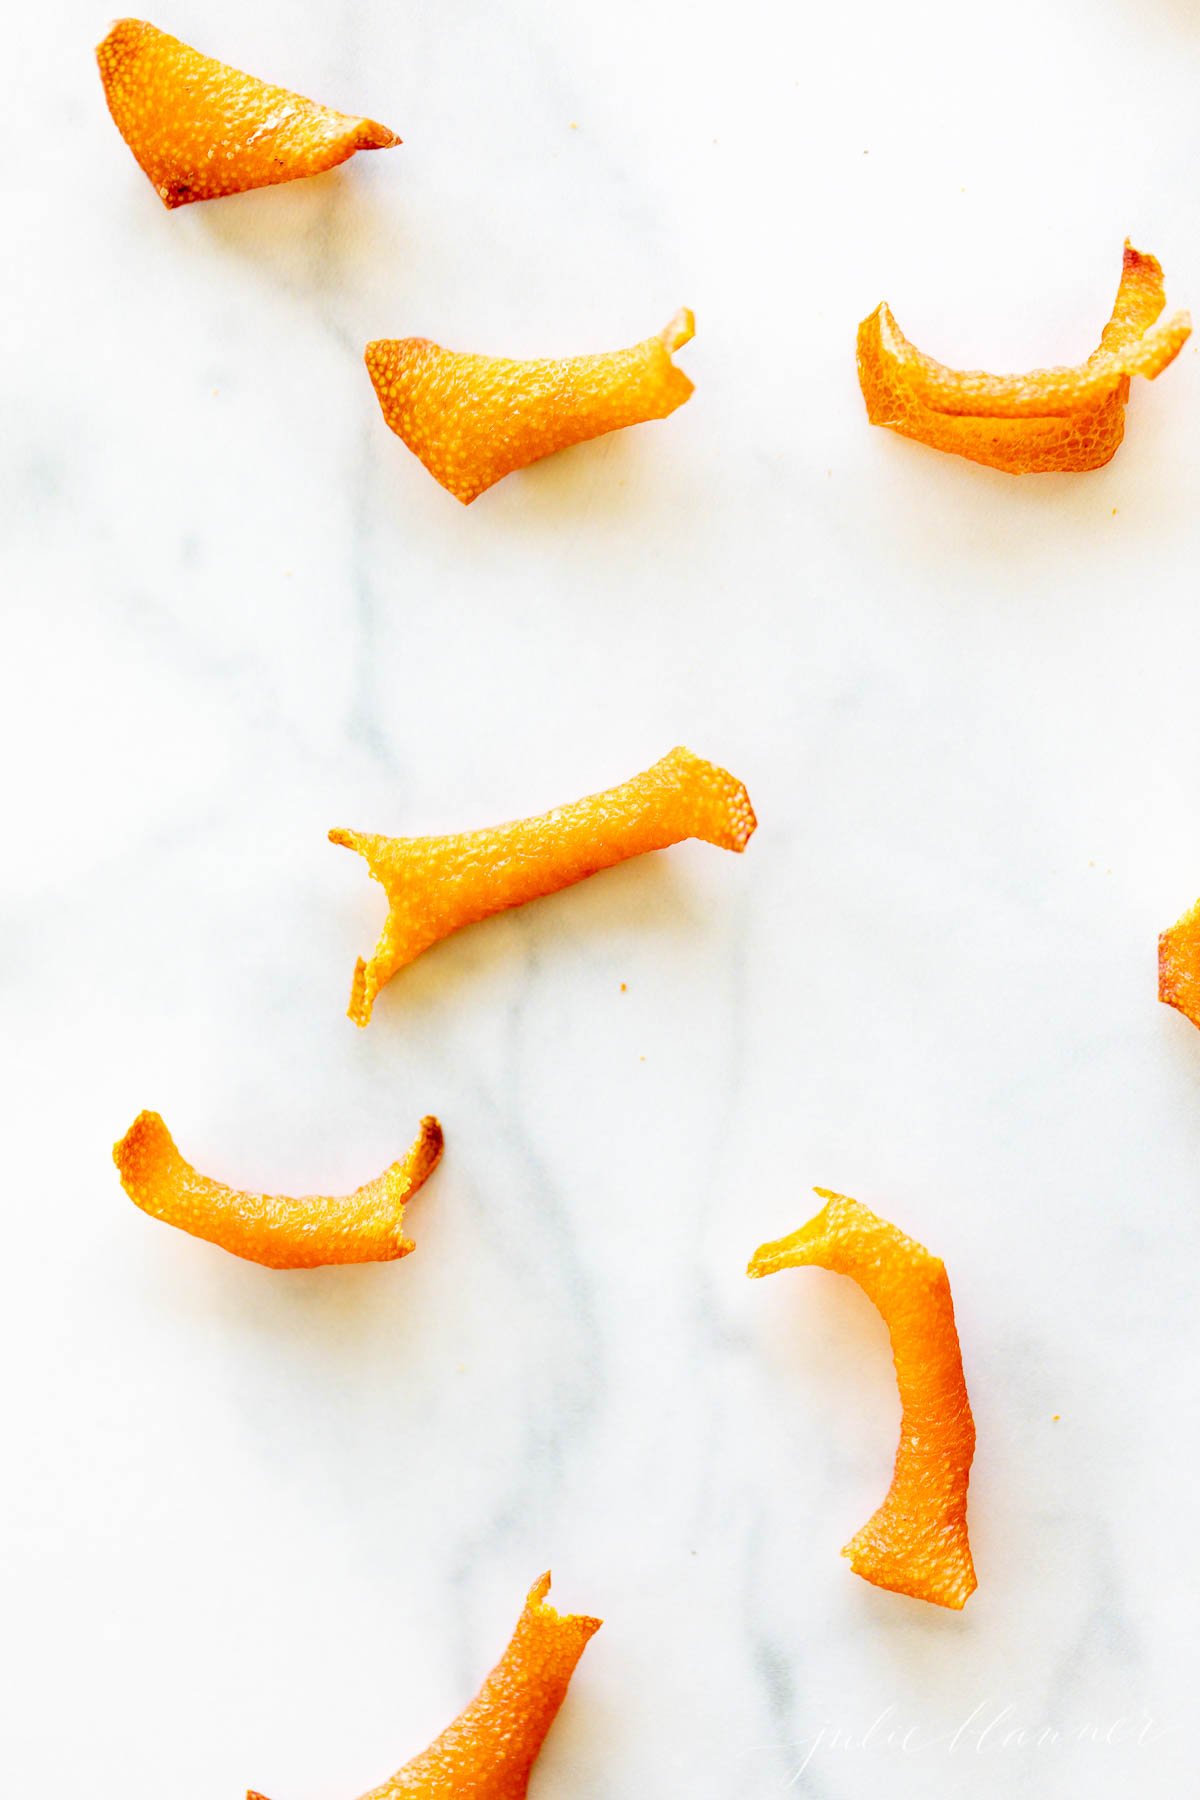 Several small, curved strips of dried orange peel are scattered on a white marble surface.